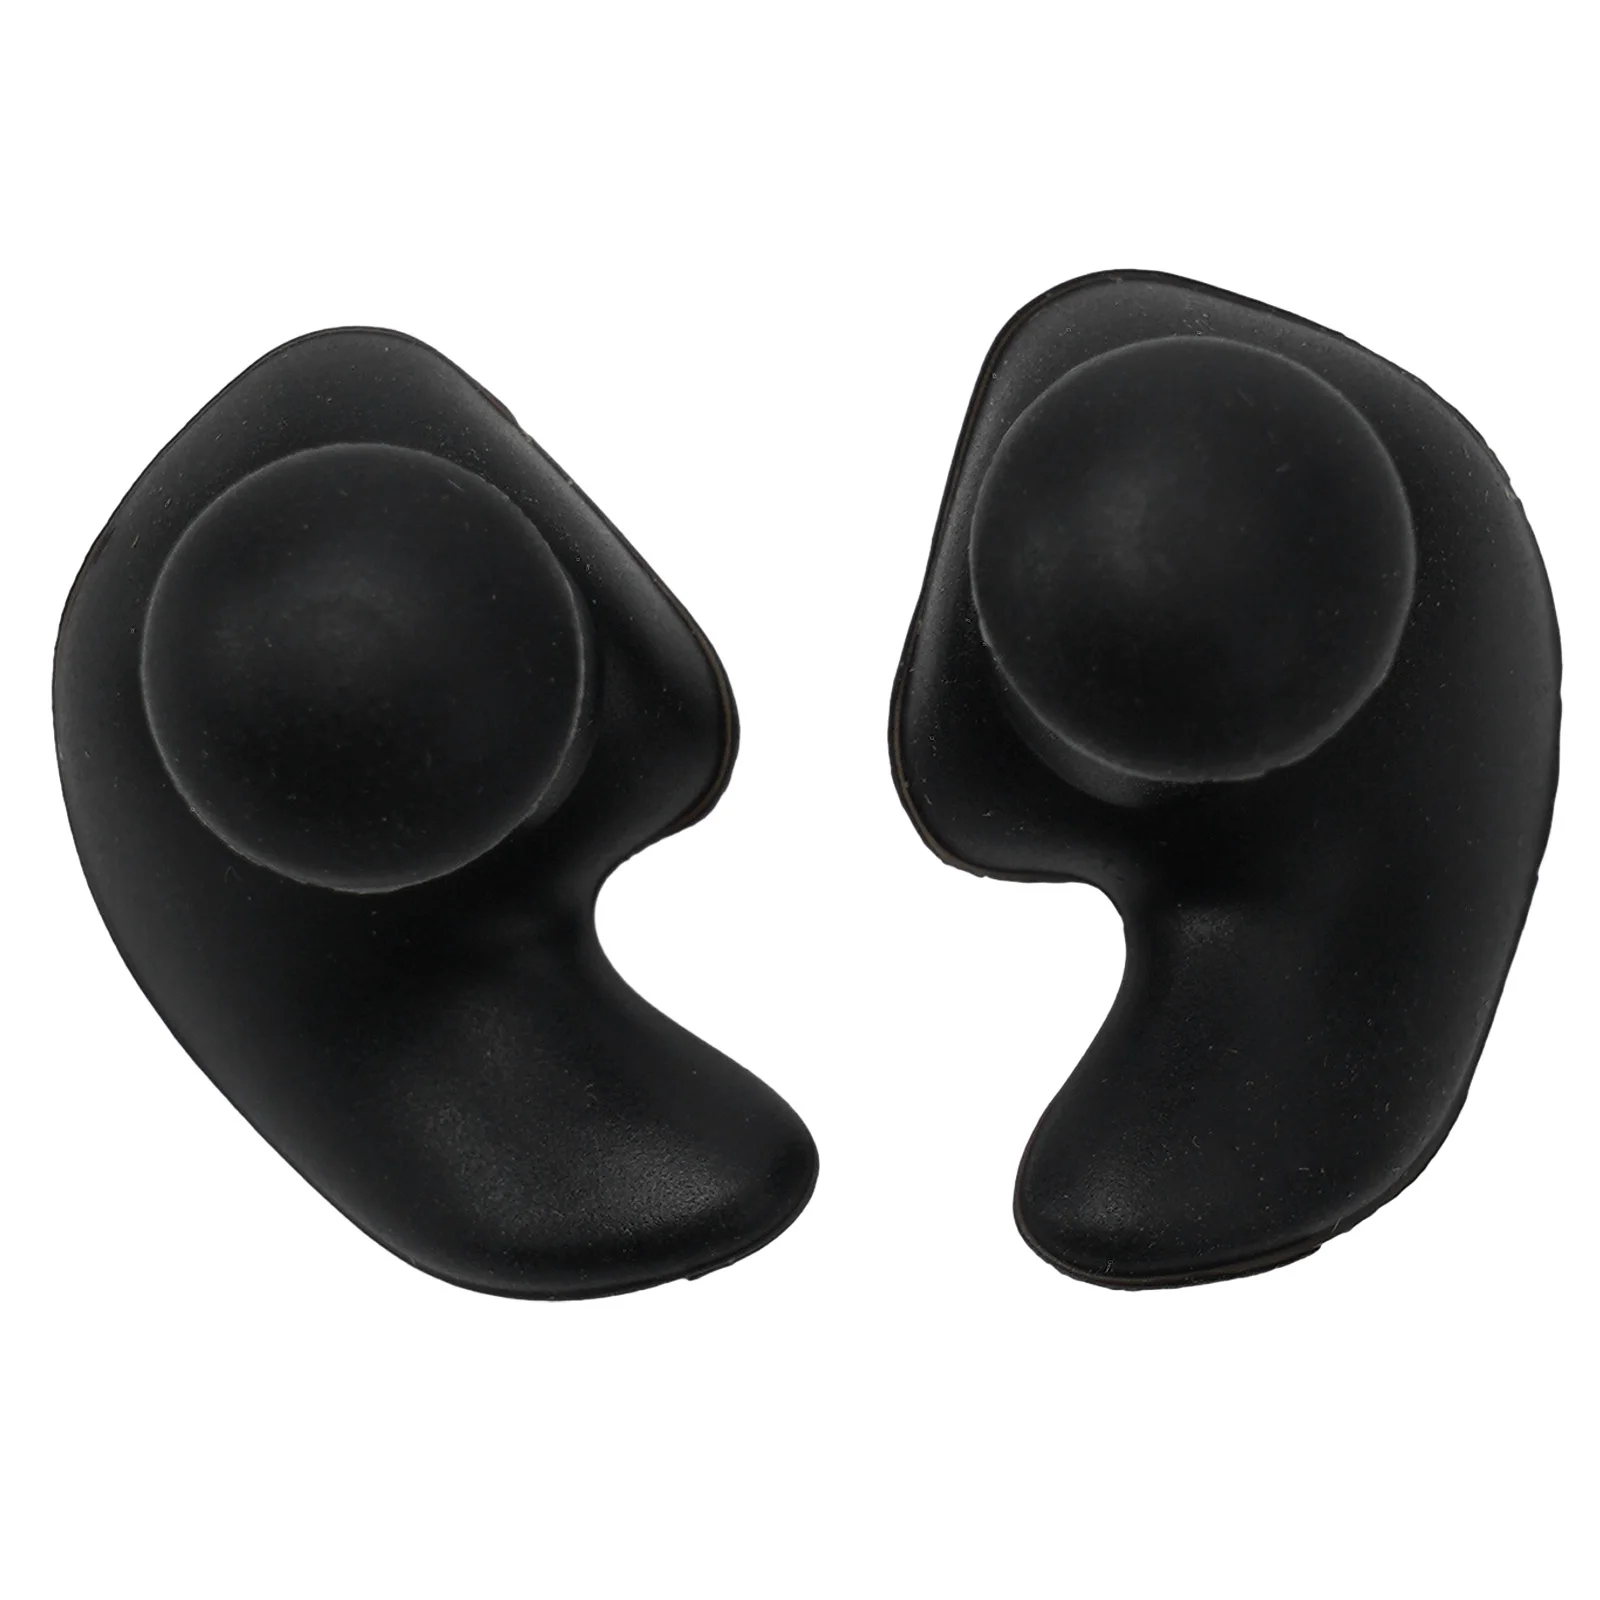 

Spiral Earplugs for Swimming, Waterproof and Soundproof, Ergonomic 3D Modeling, Comfortable Silicone Material 1 Pair